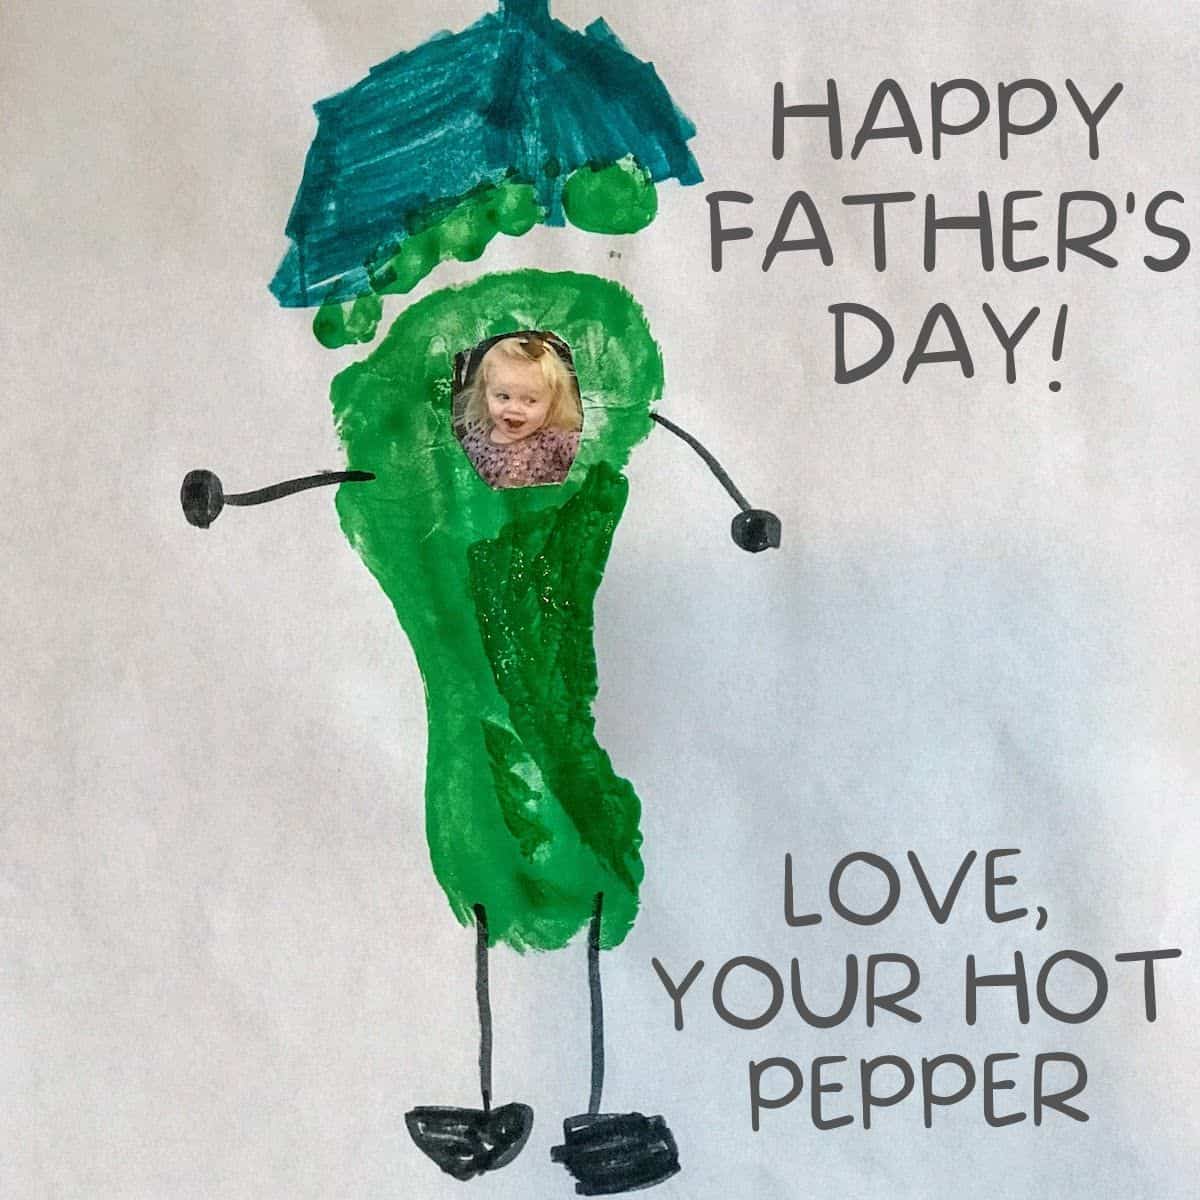 pepper made from footprint with child's face pasted on